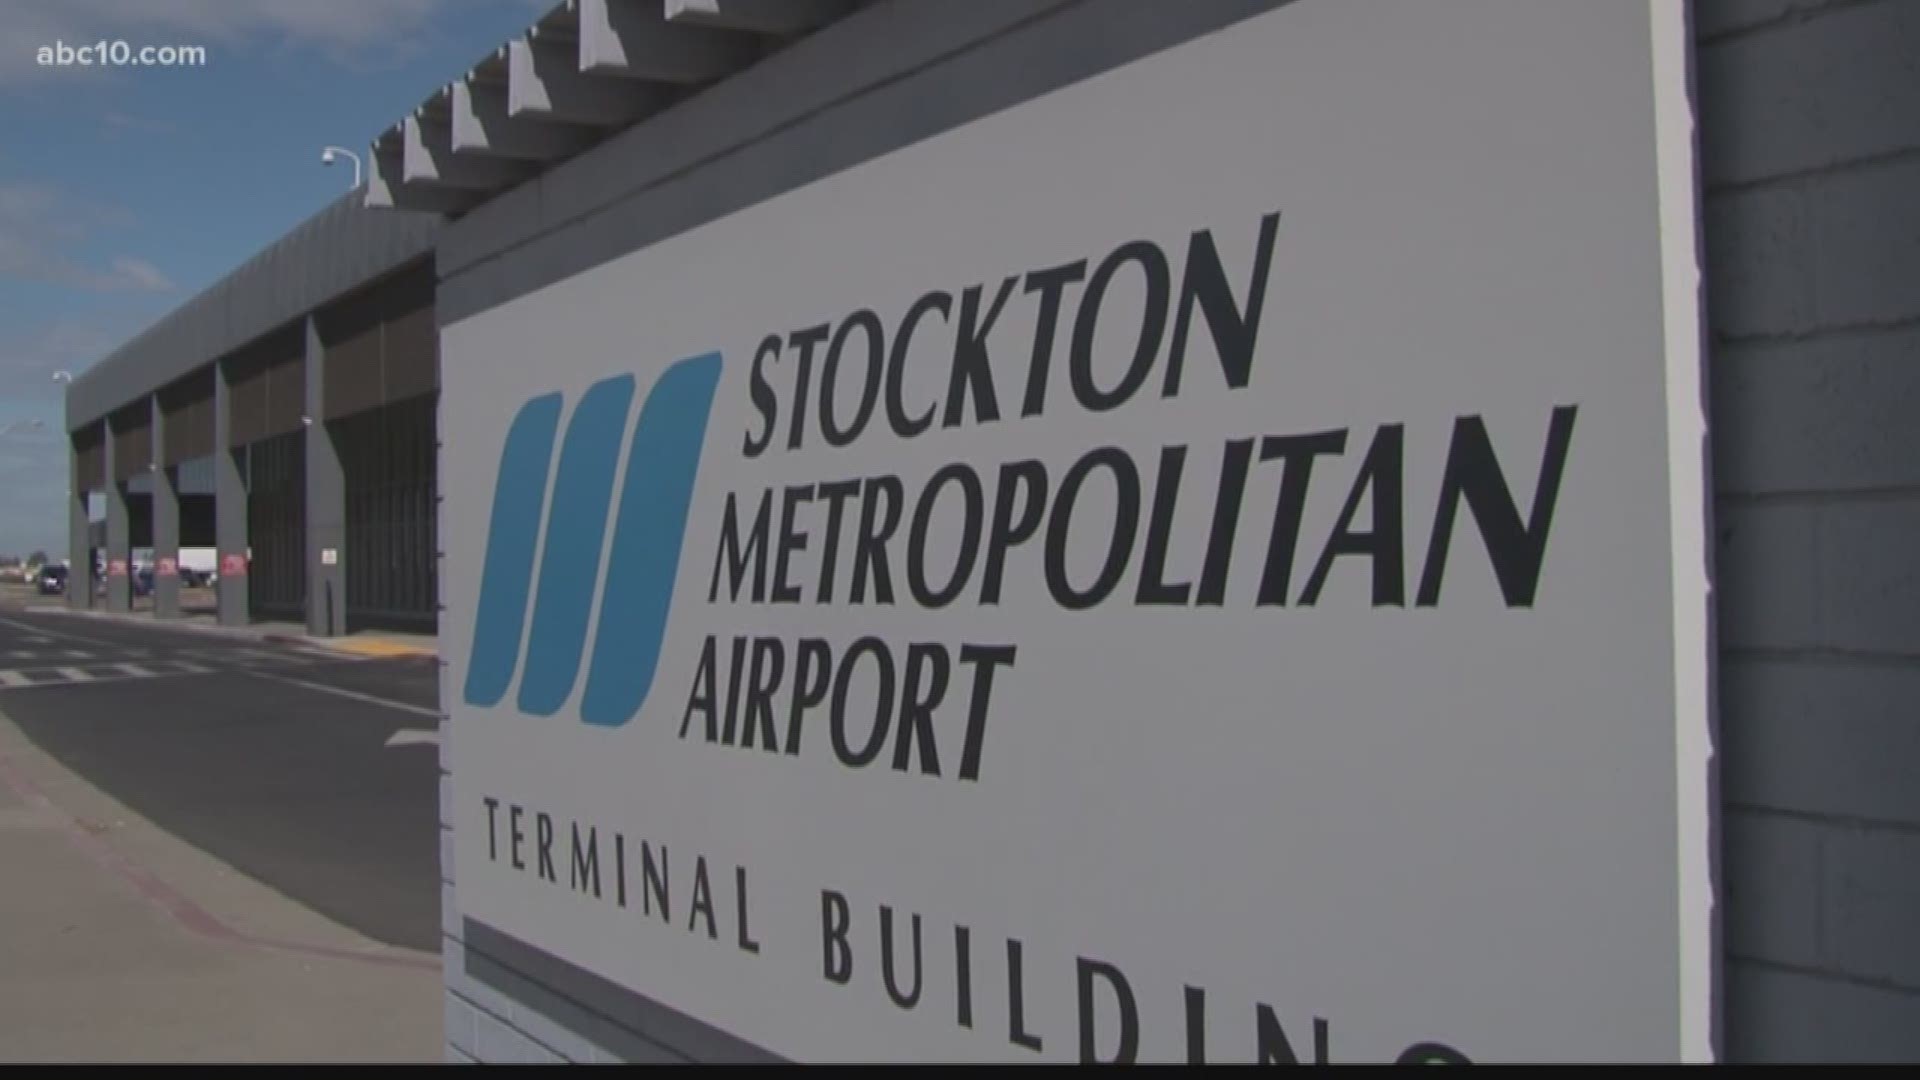 The airport is considering changing its name from Stockton Metropolitan Airport to the San Francisco-Stockton Regional Airport.